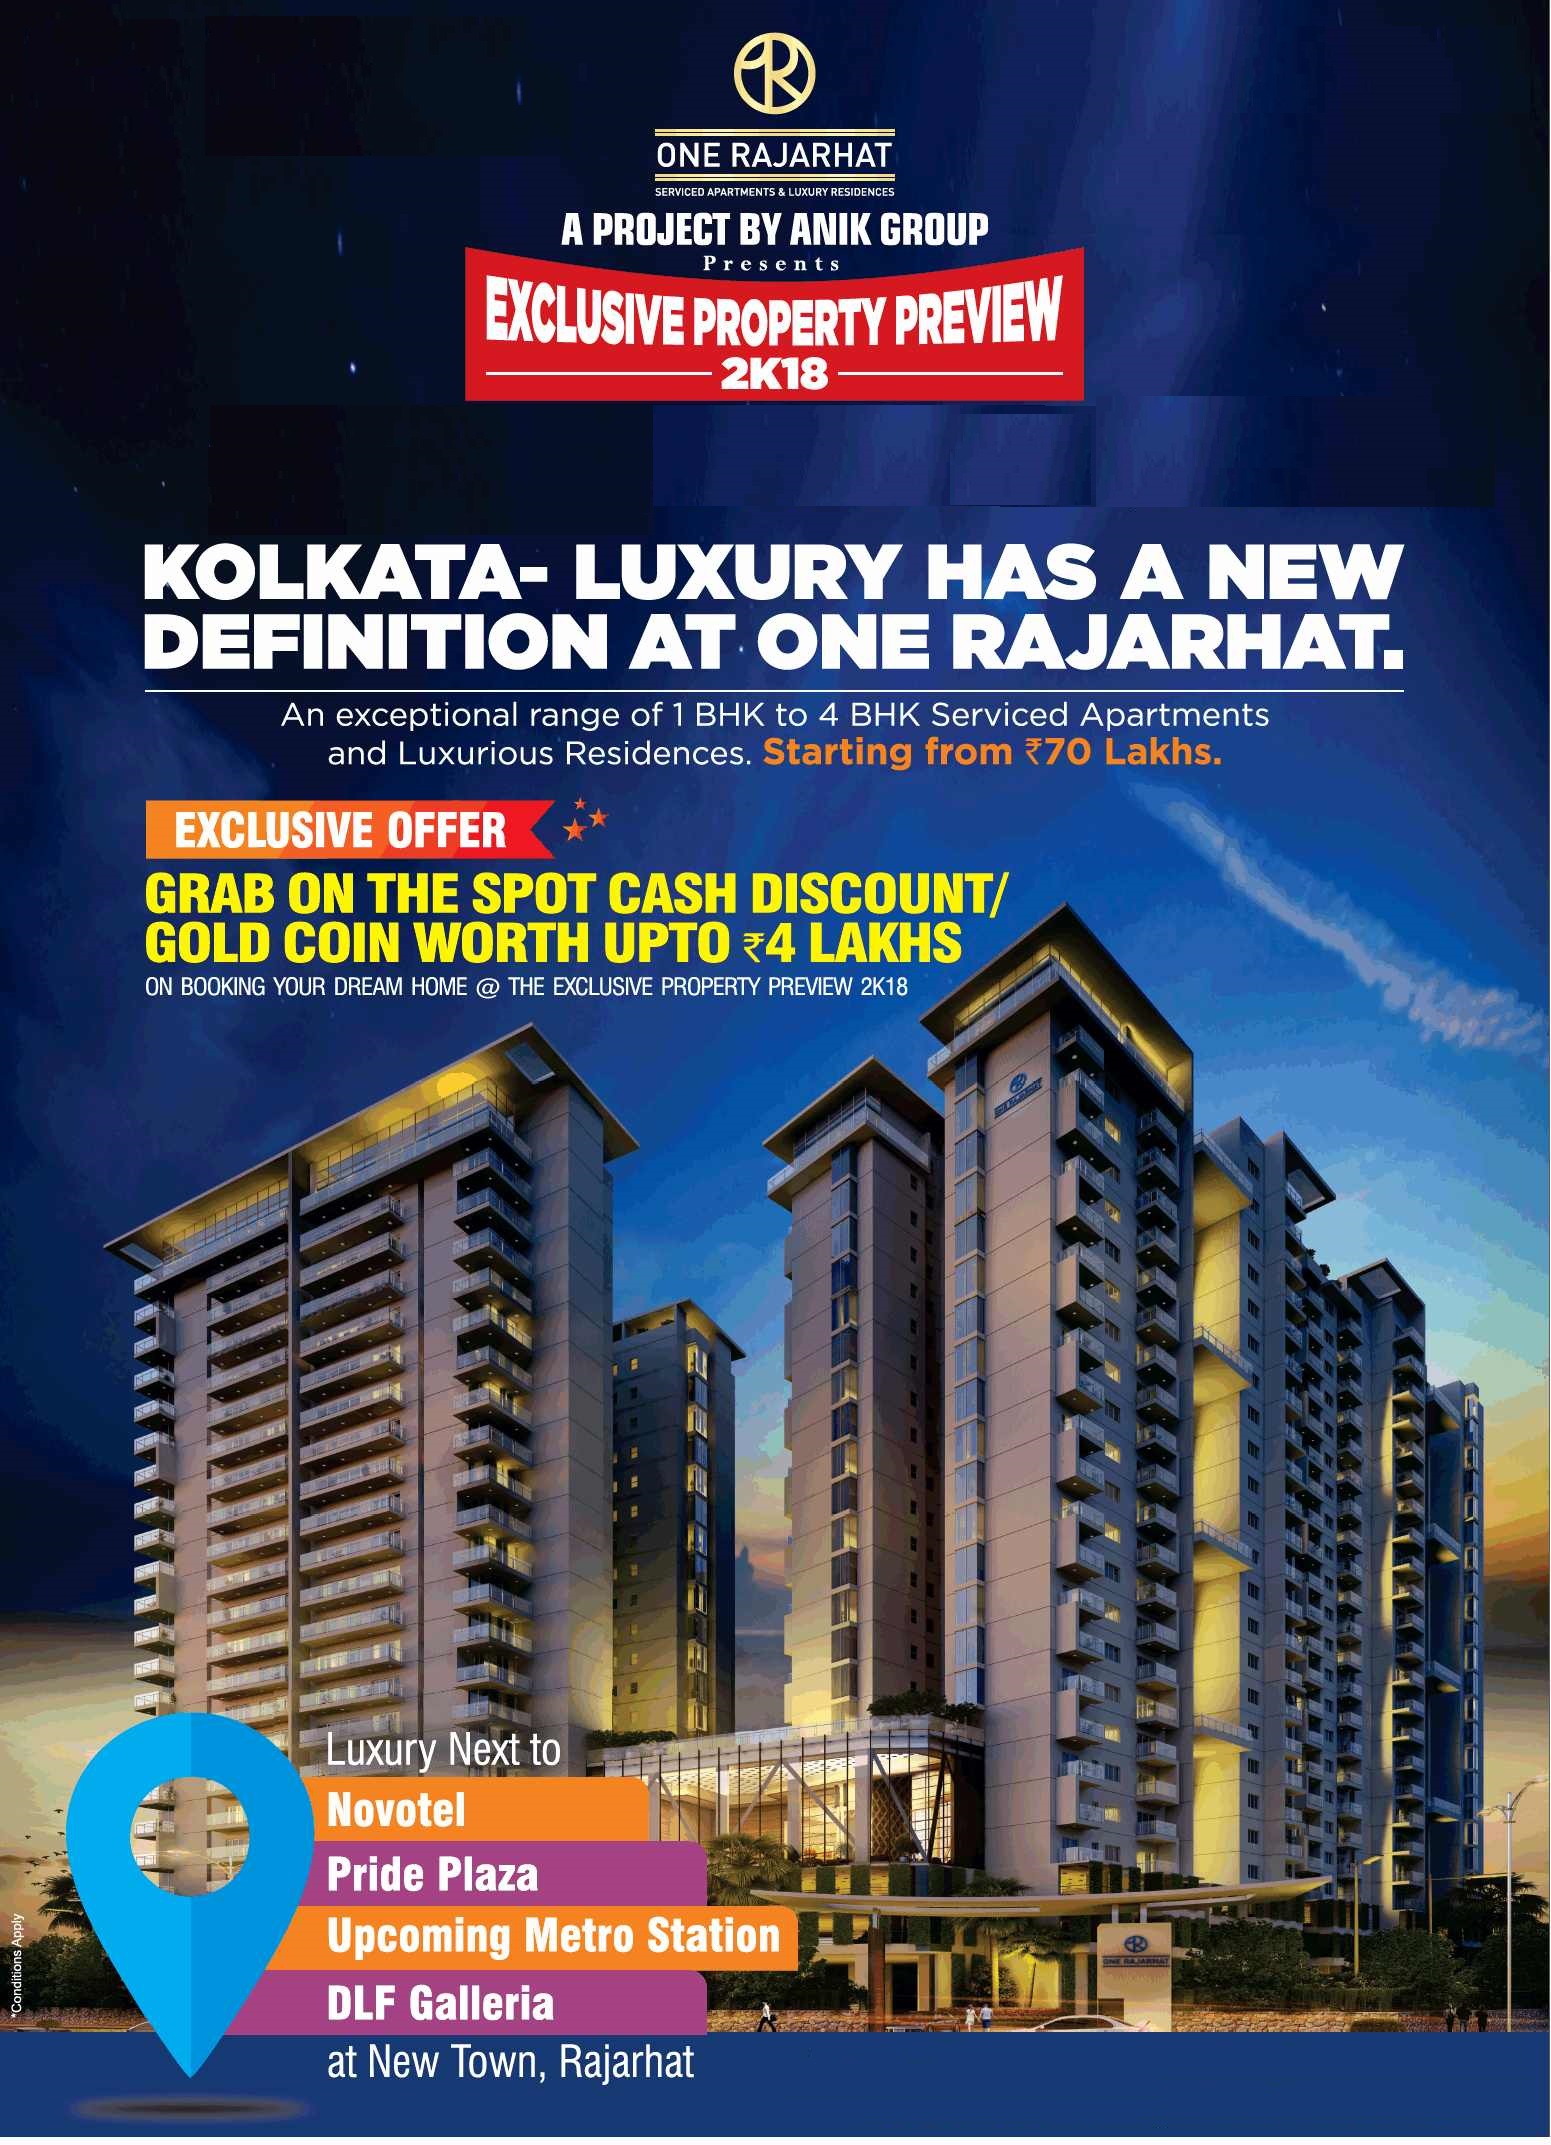 Grab on the spot cash discount/gold coin worth upto 4 lakhs at Ruchi One Rajarhat in Kolkata